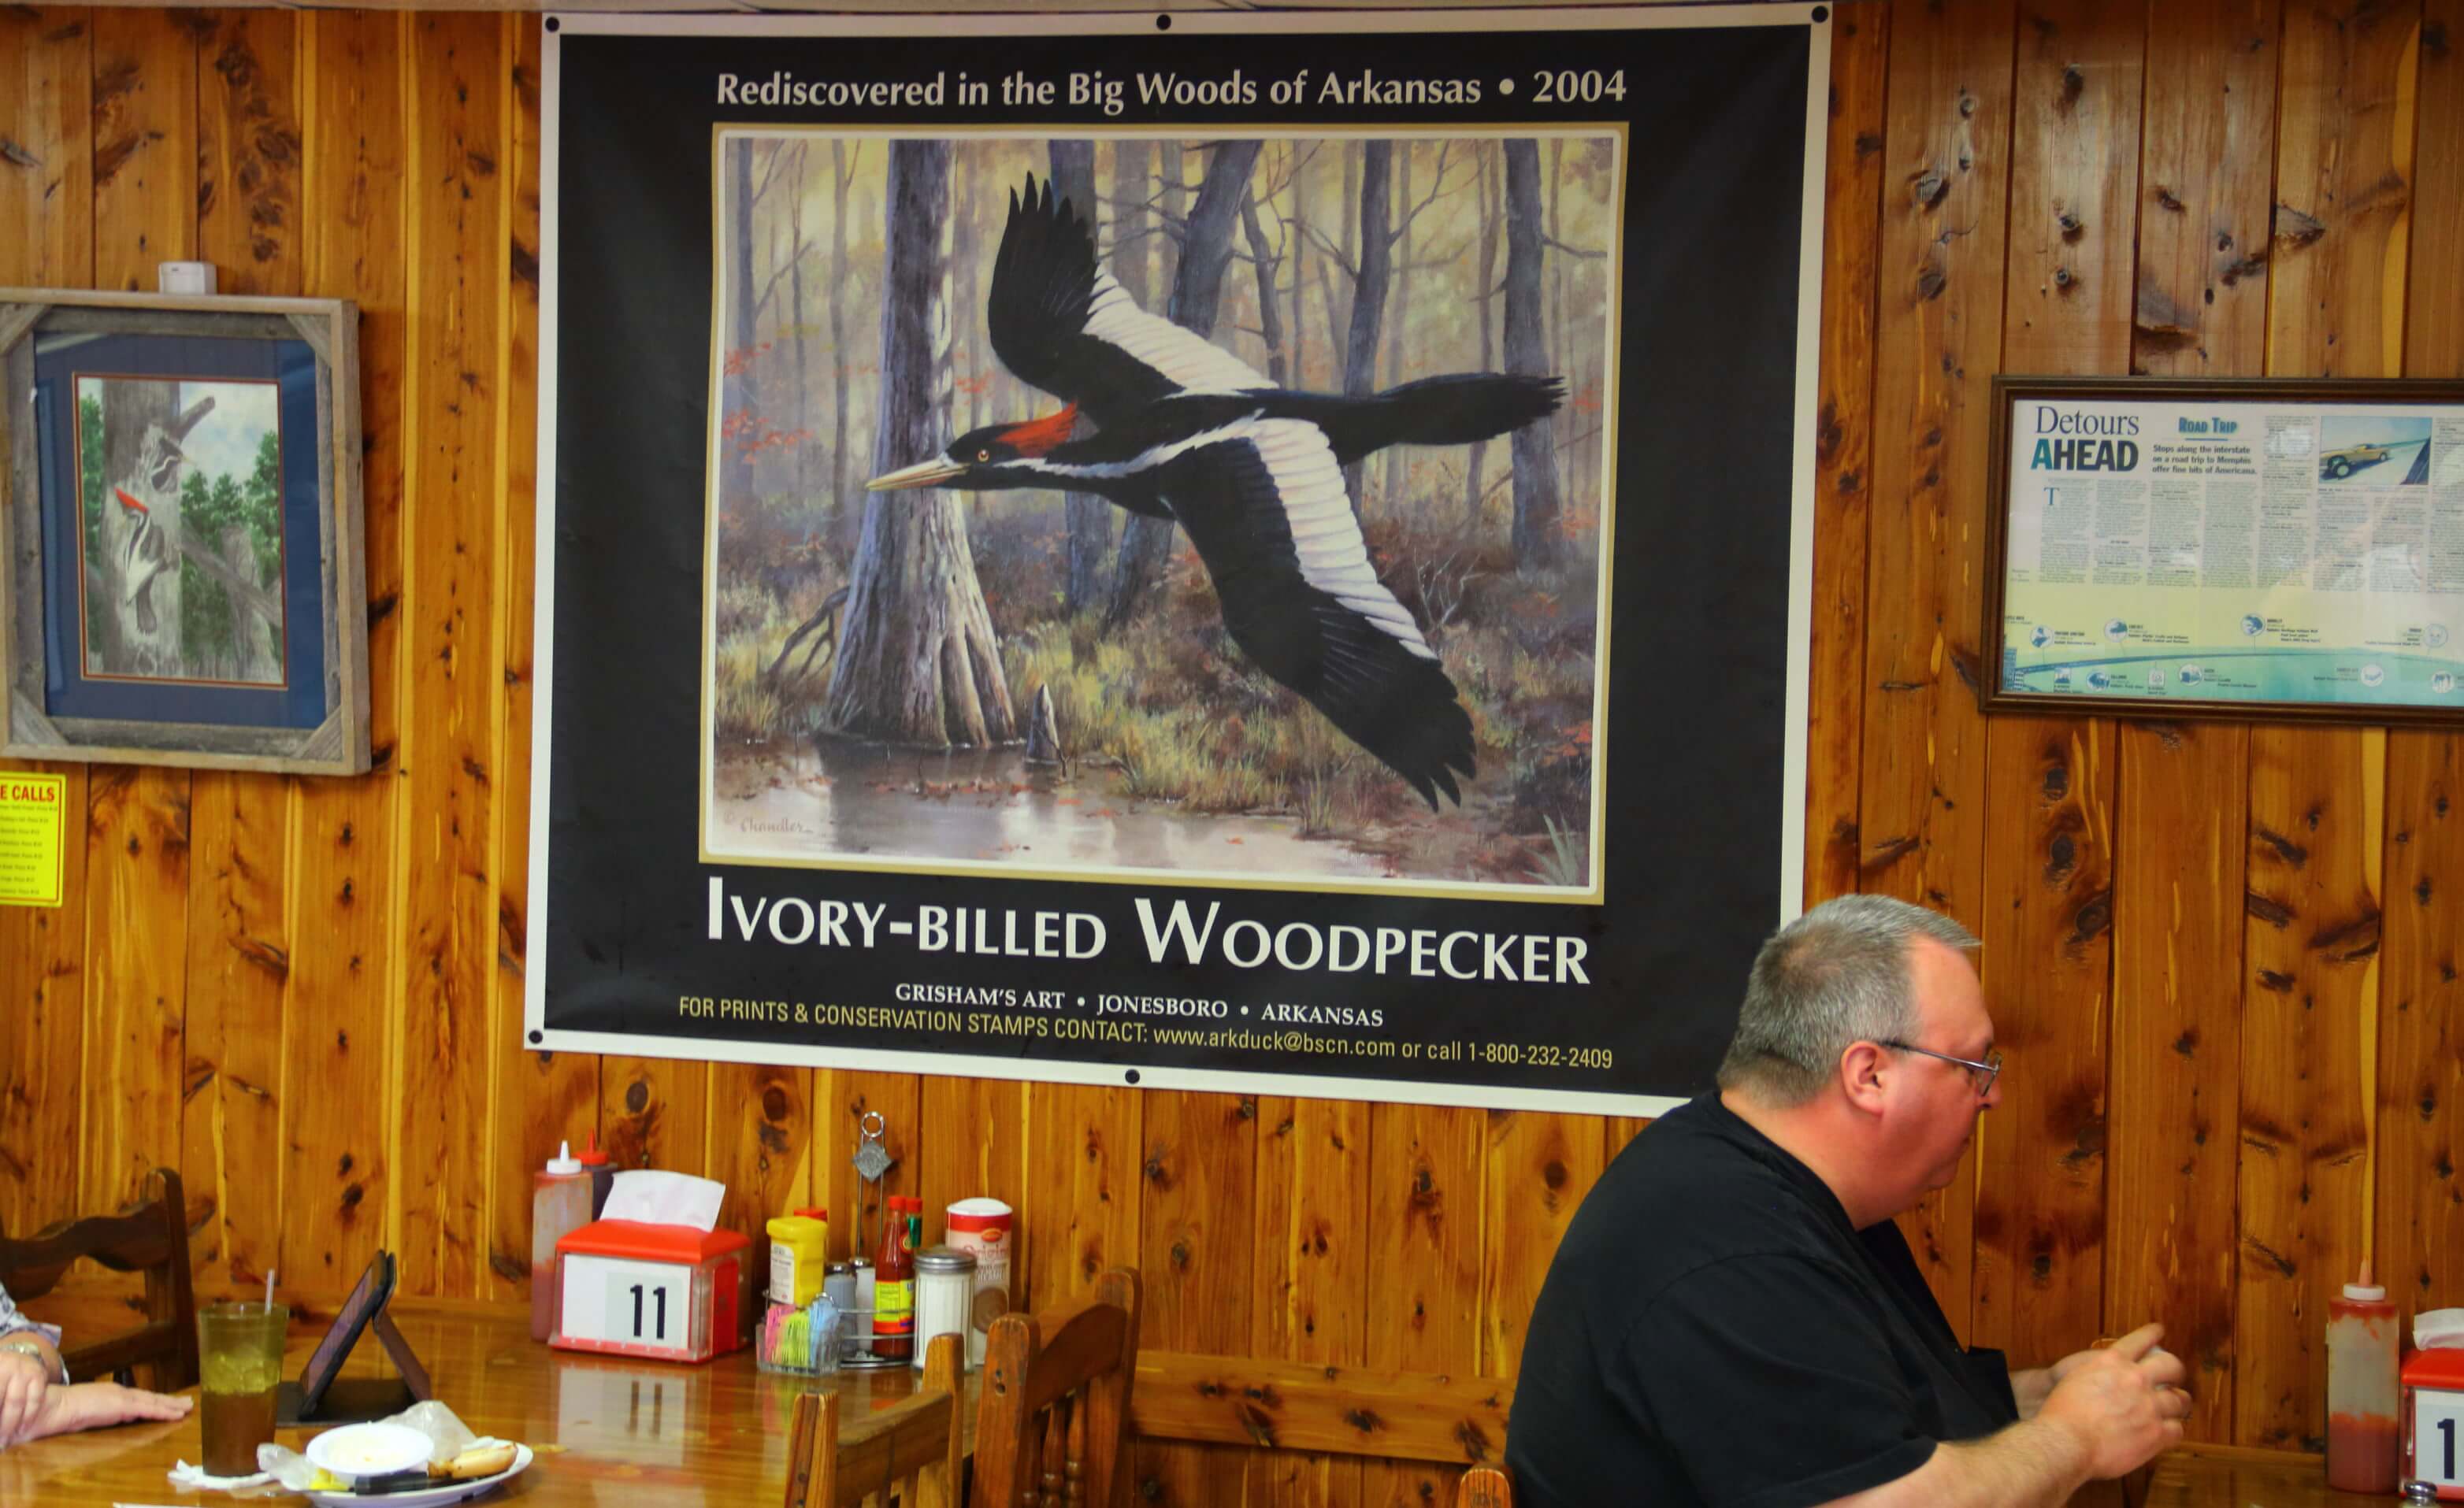 A 2004 sighting of the Ivory-billed Woodpecker in the Cache River National Wildlife Refuge was big news in nearby Brinkley, Ark., where the bird's likeness features prominently in local establishments like Gene's Restaurant. Photo by Bruce Beehler